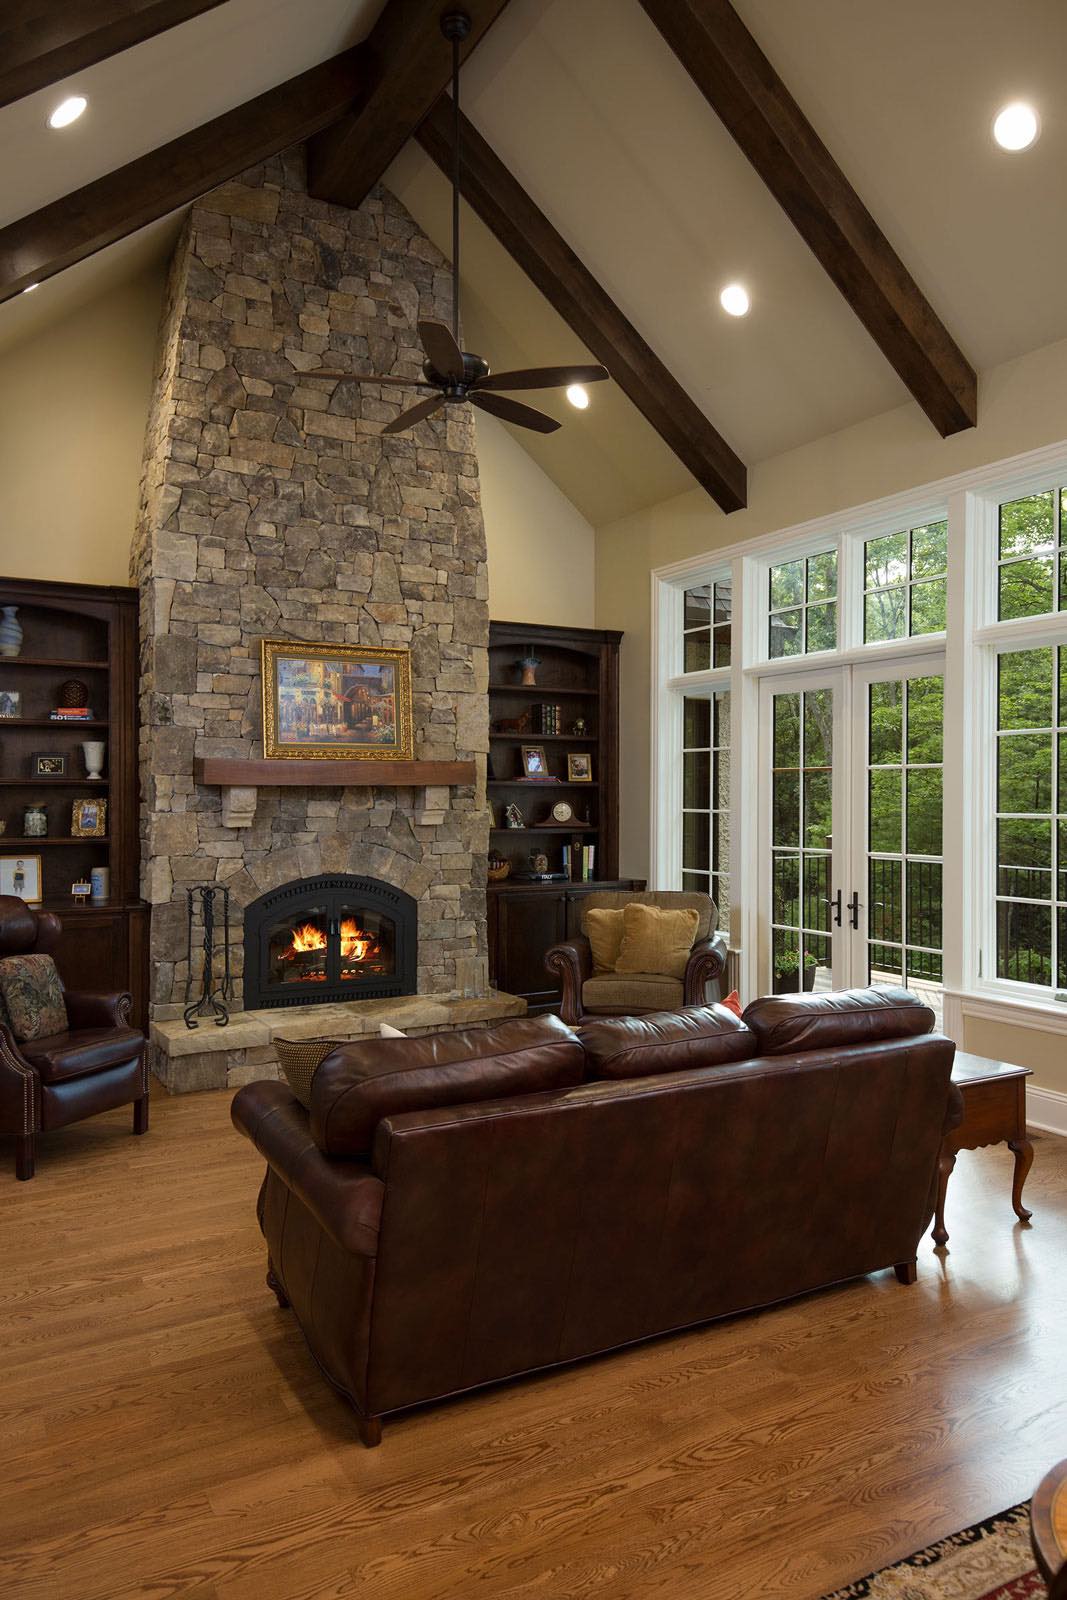 Tudor living room with stone hearth and fireplace and exposed rafters, custom built by Bluestone Construction.